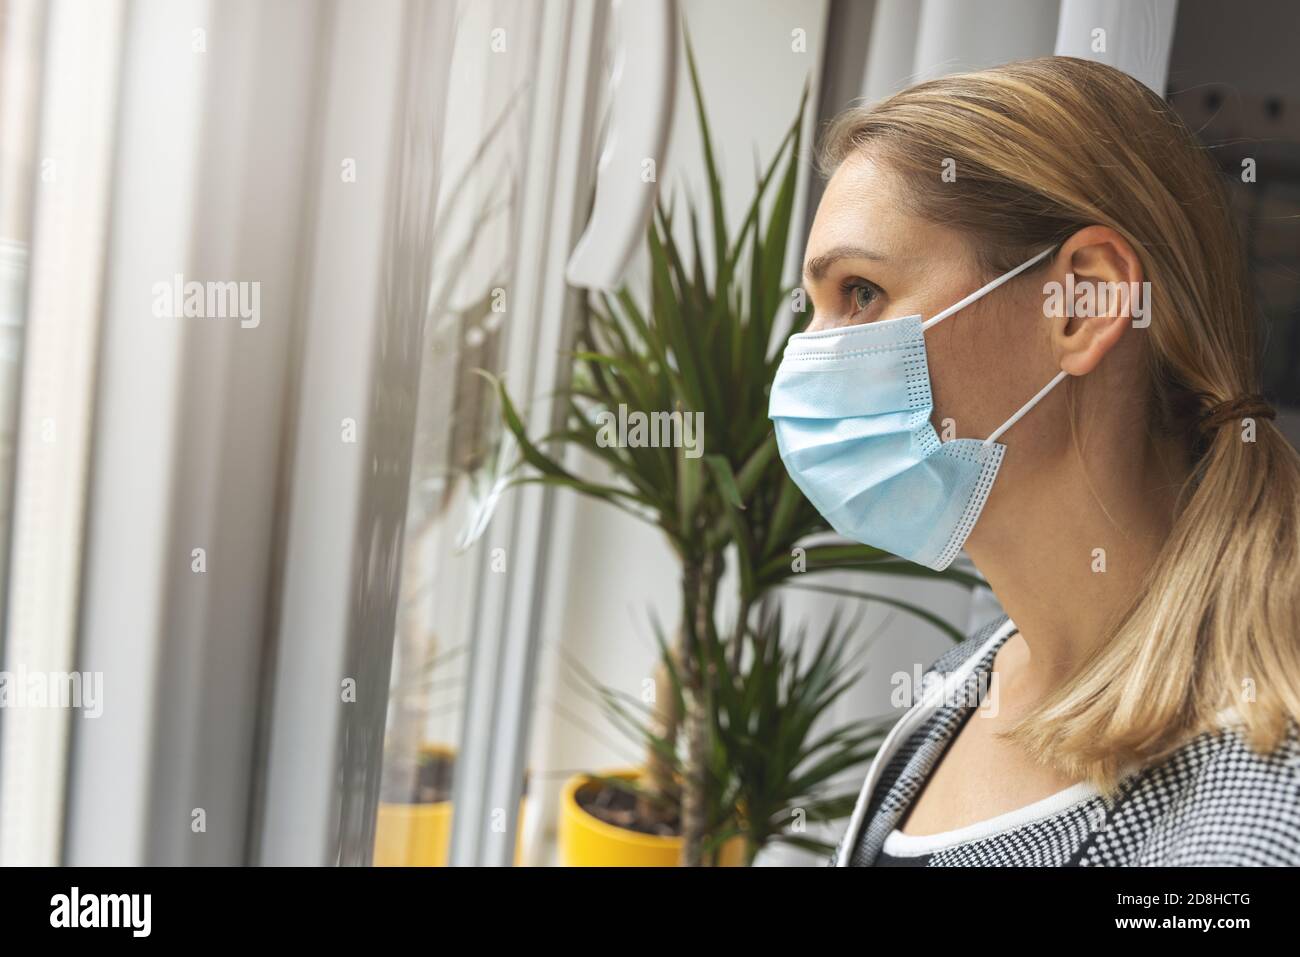 home quarantine - young depressed woman with medical face mask looking through window Stock Photo